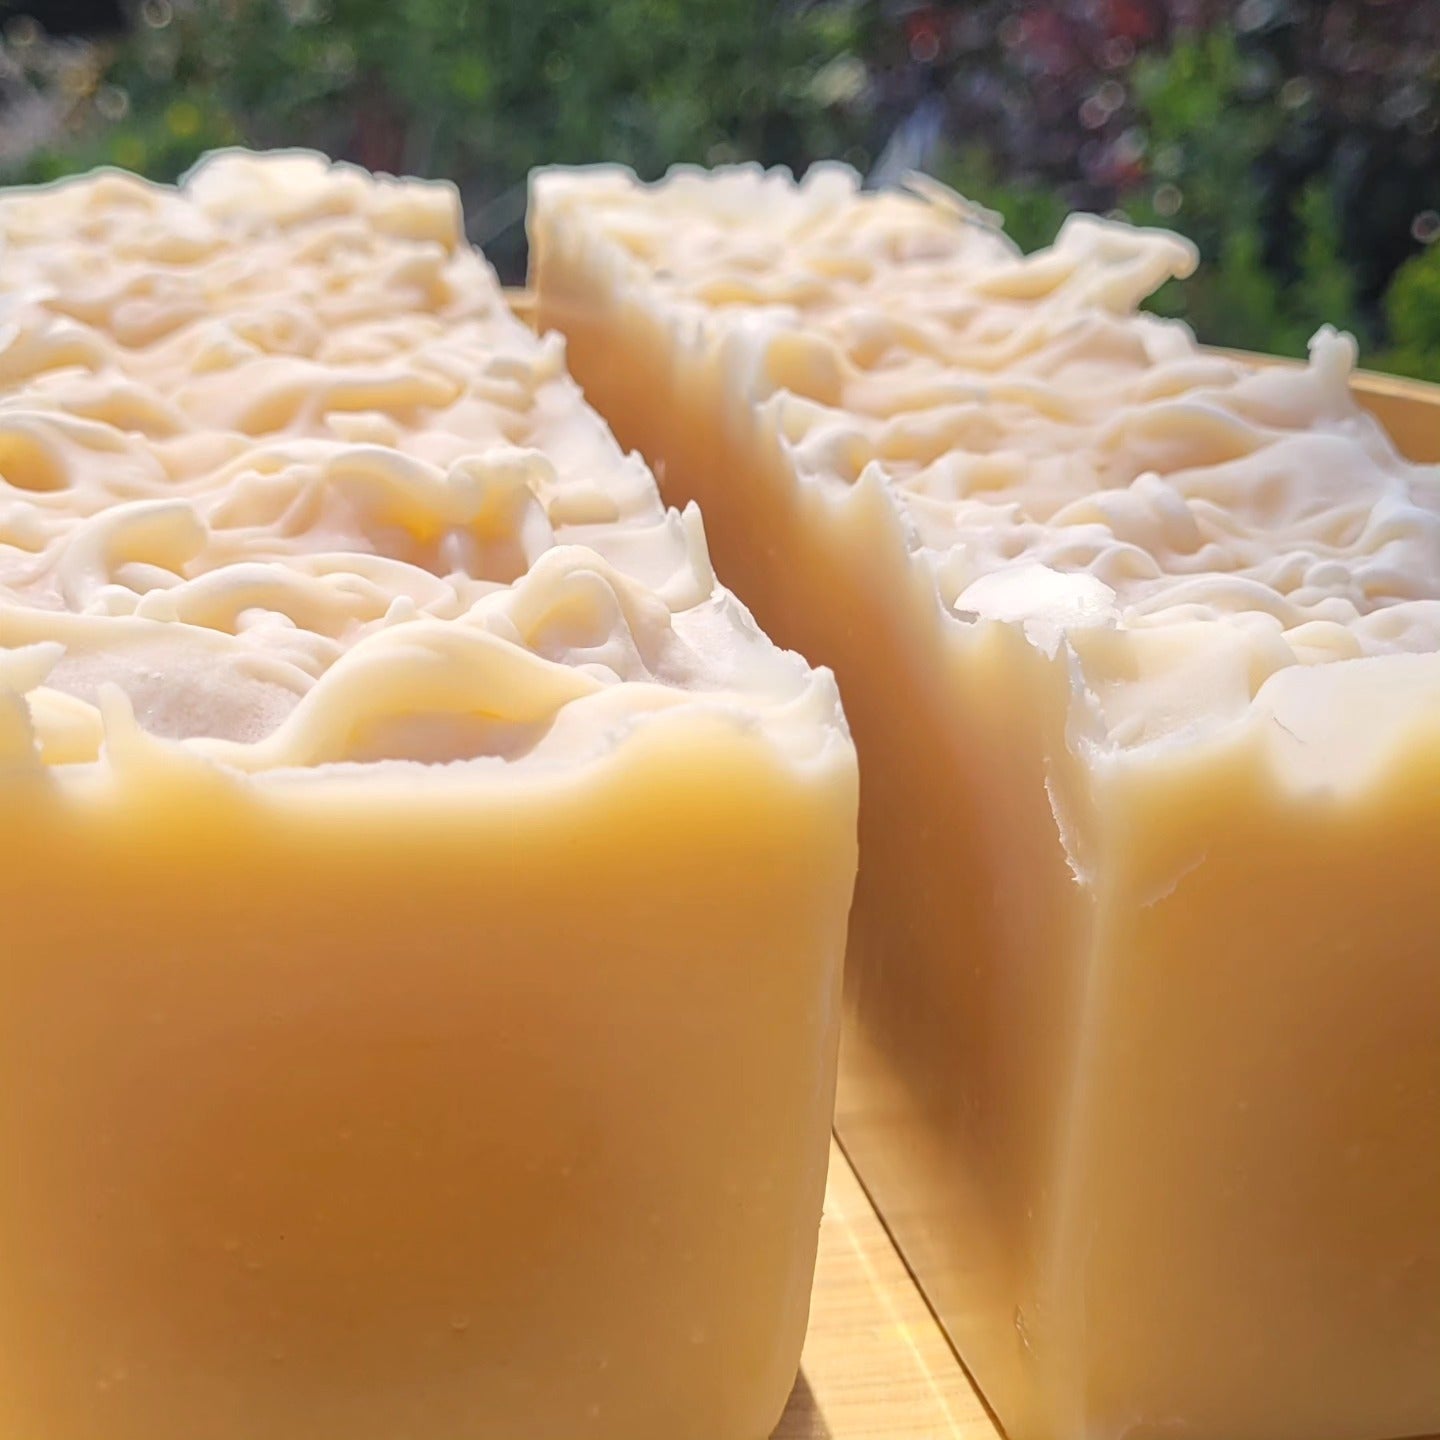 Blocks of creamy Good Soap shea butter and goat milk soaps ready for cutting